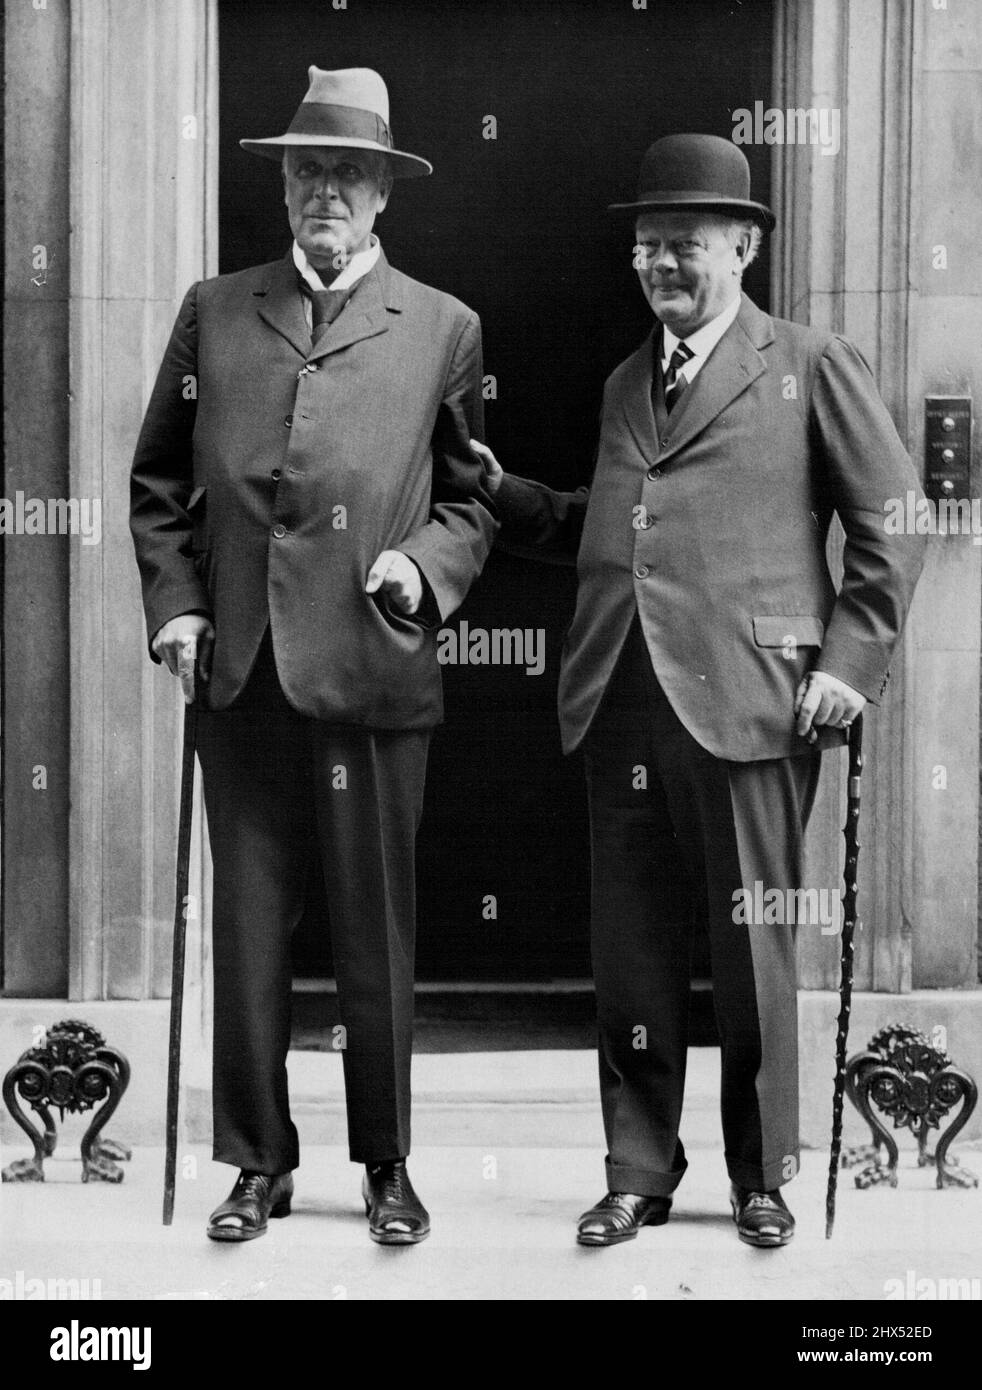 Today's Important Cabinet Meeting - Lord Sankey (left) and Lord Hailsham arriving at No. 10 Downing Street for this morning's important Cabinet meeting. September 5, 1933. (Photo by London News Agency Photos Ltd.). Stock Photo